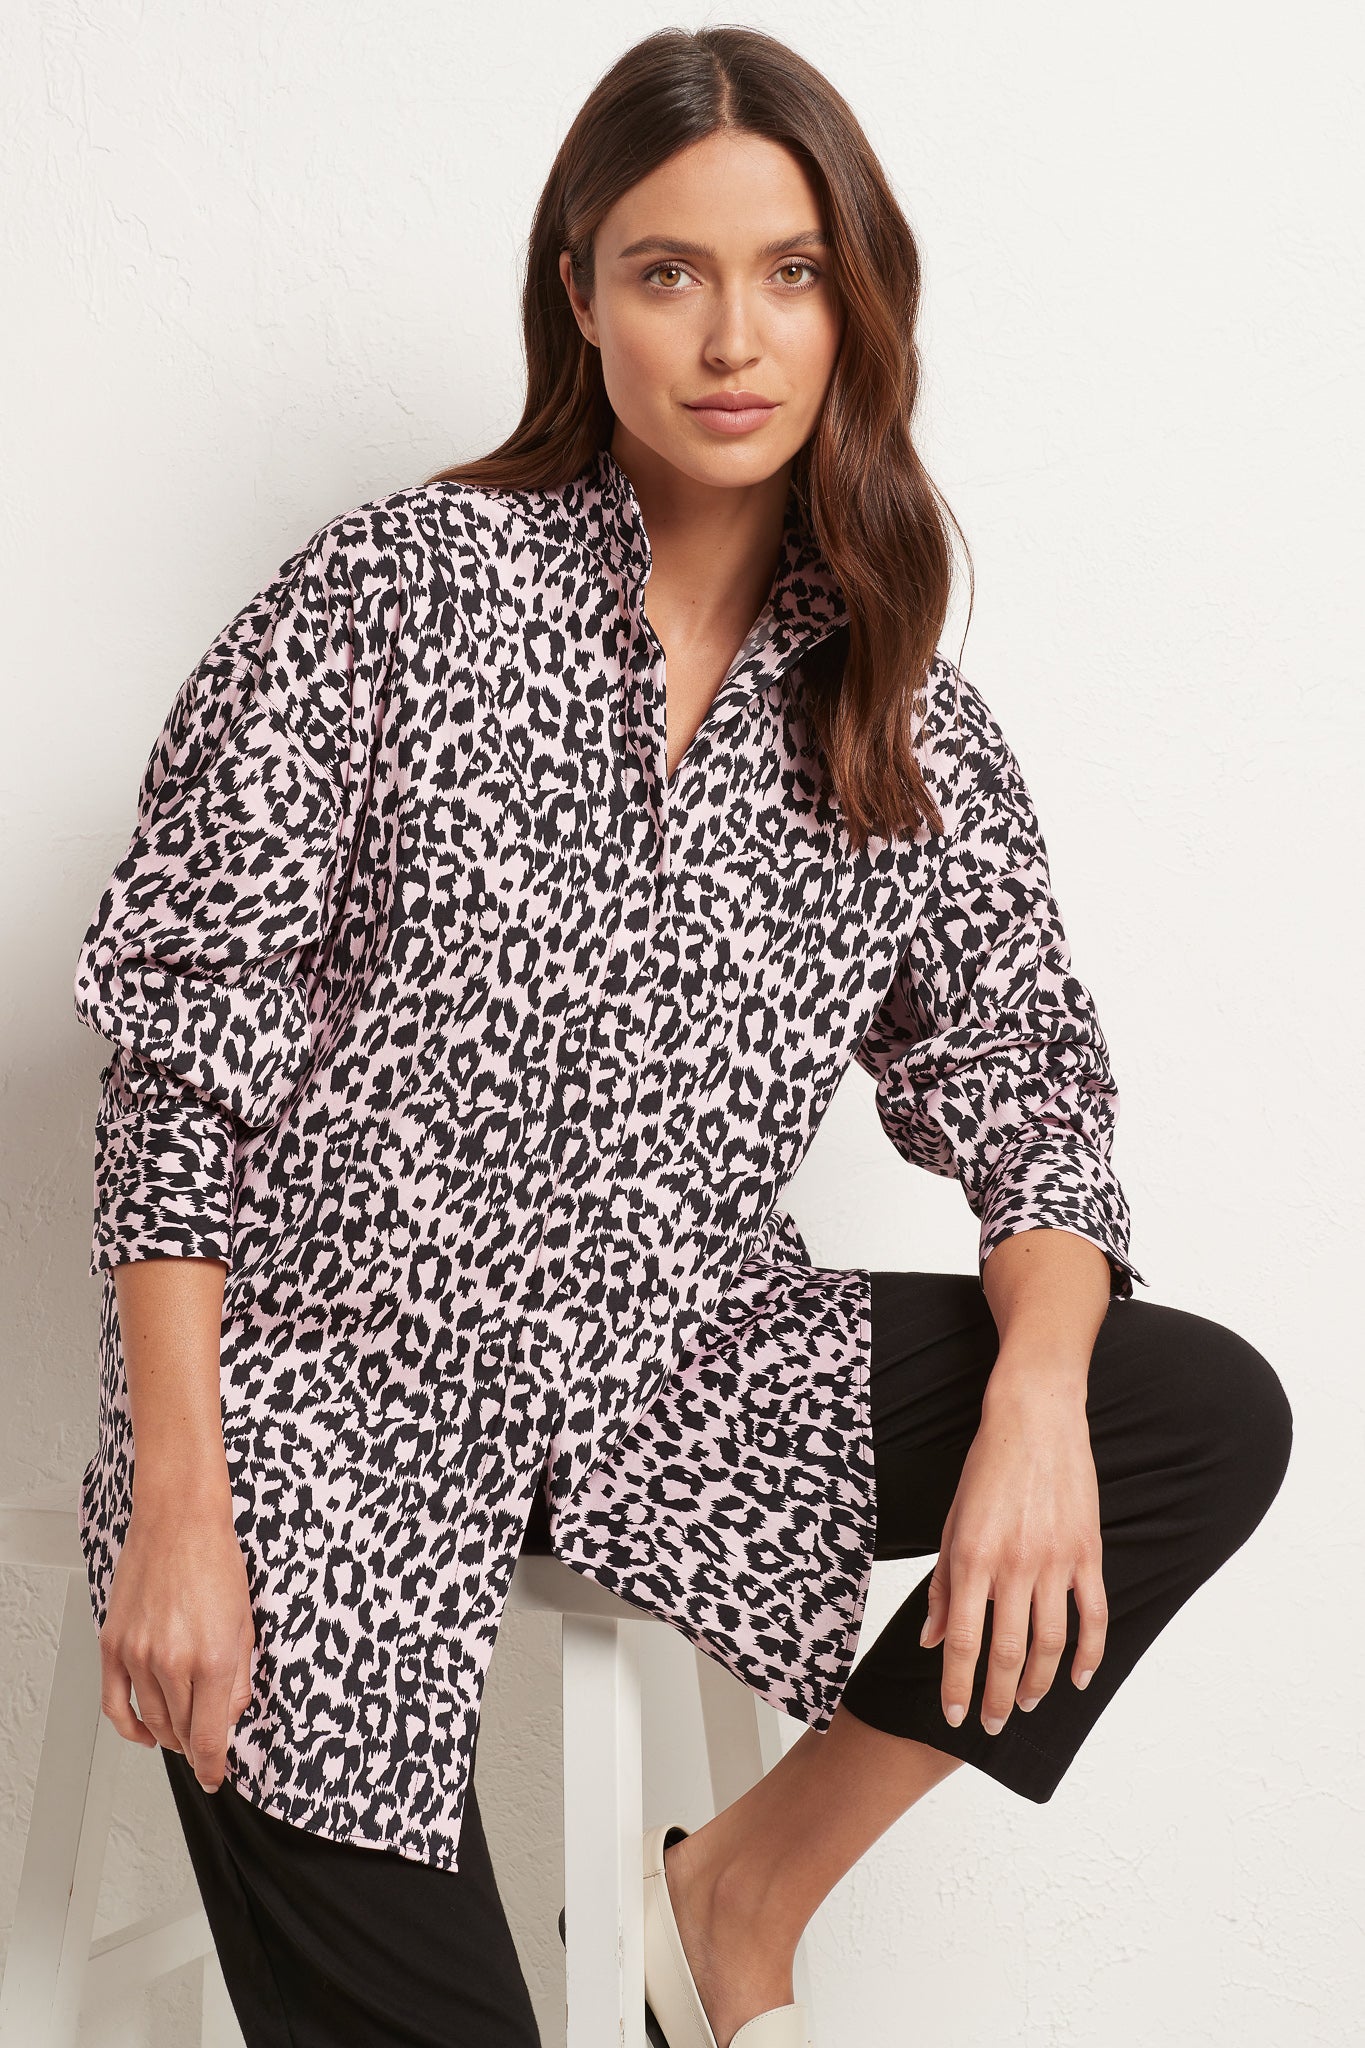 Will Leopard Print ever go out of style? Not on our watch!